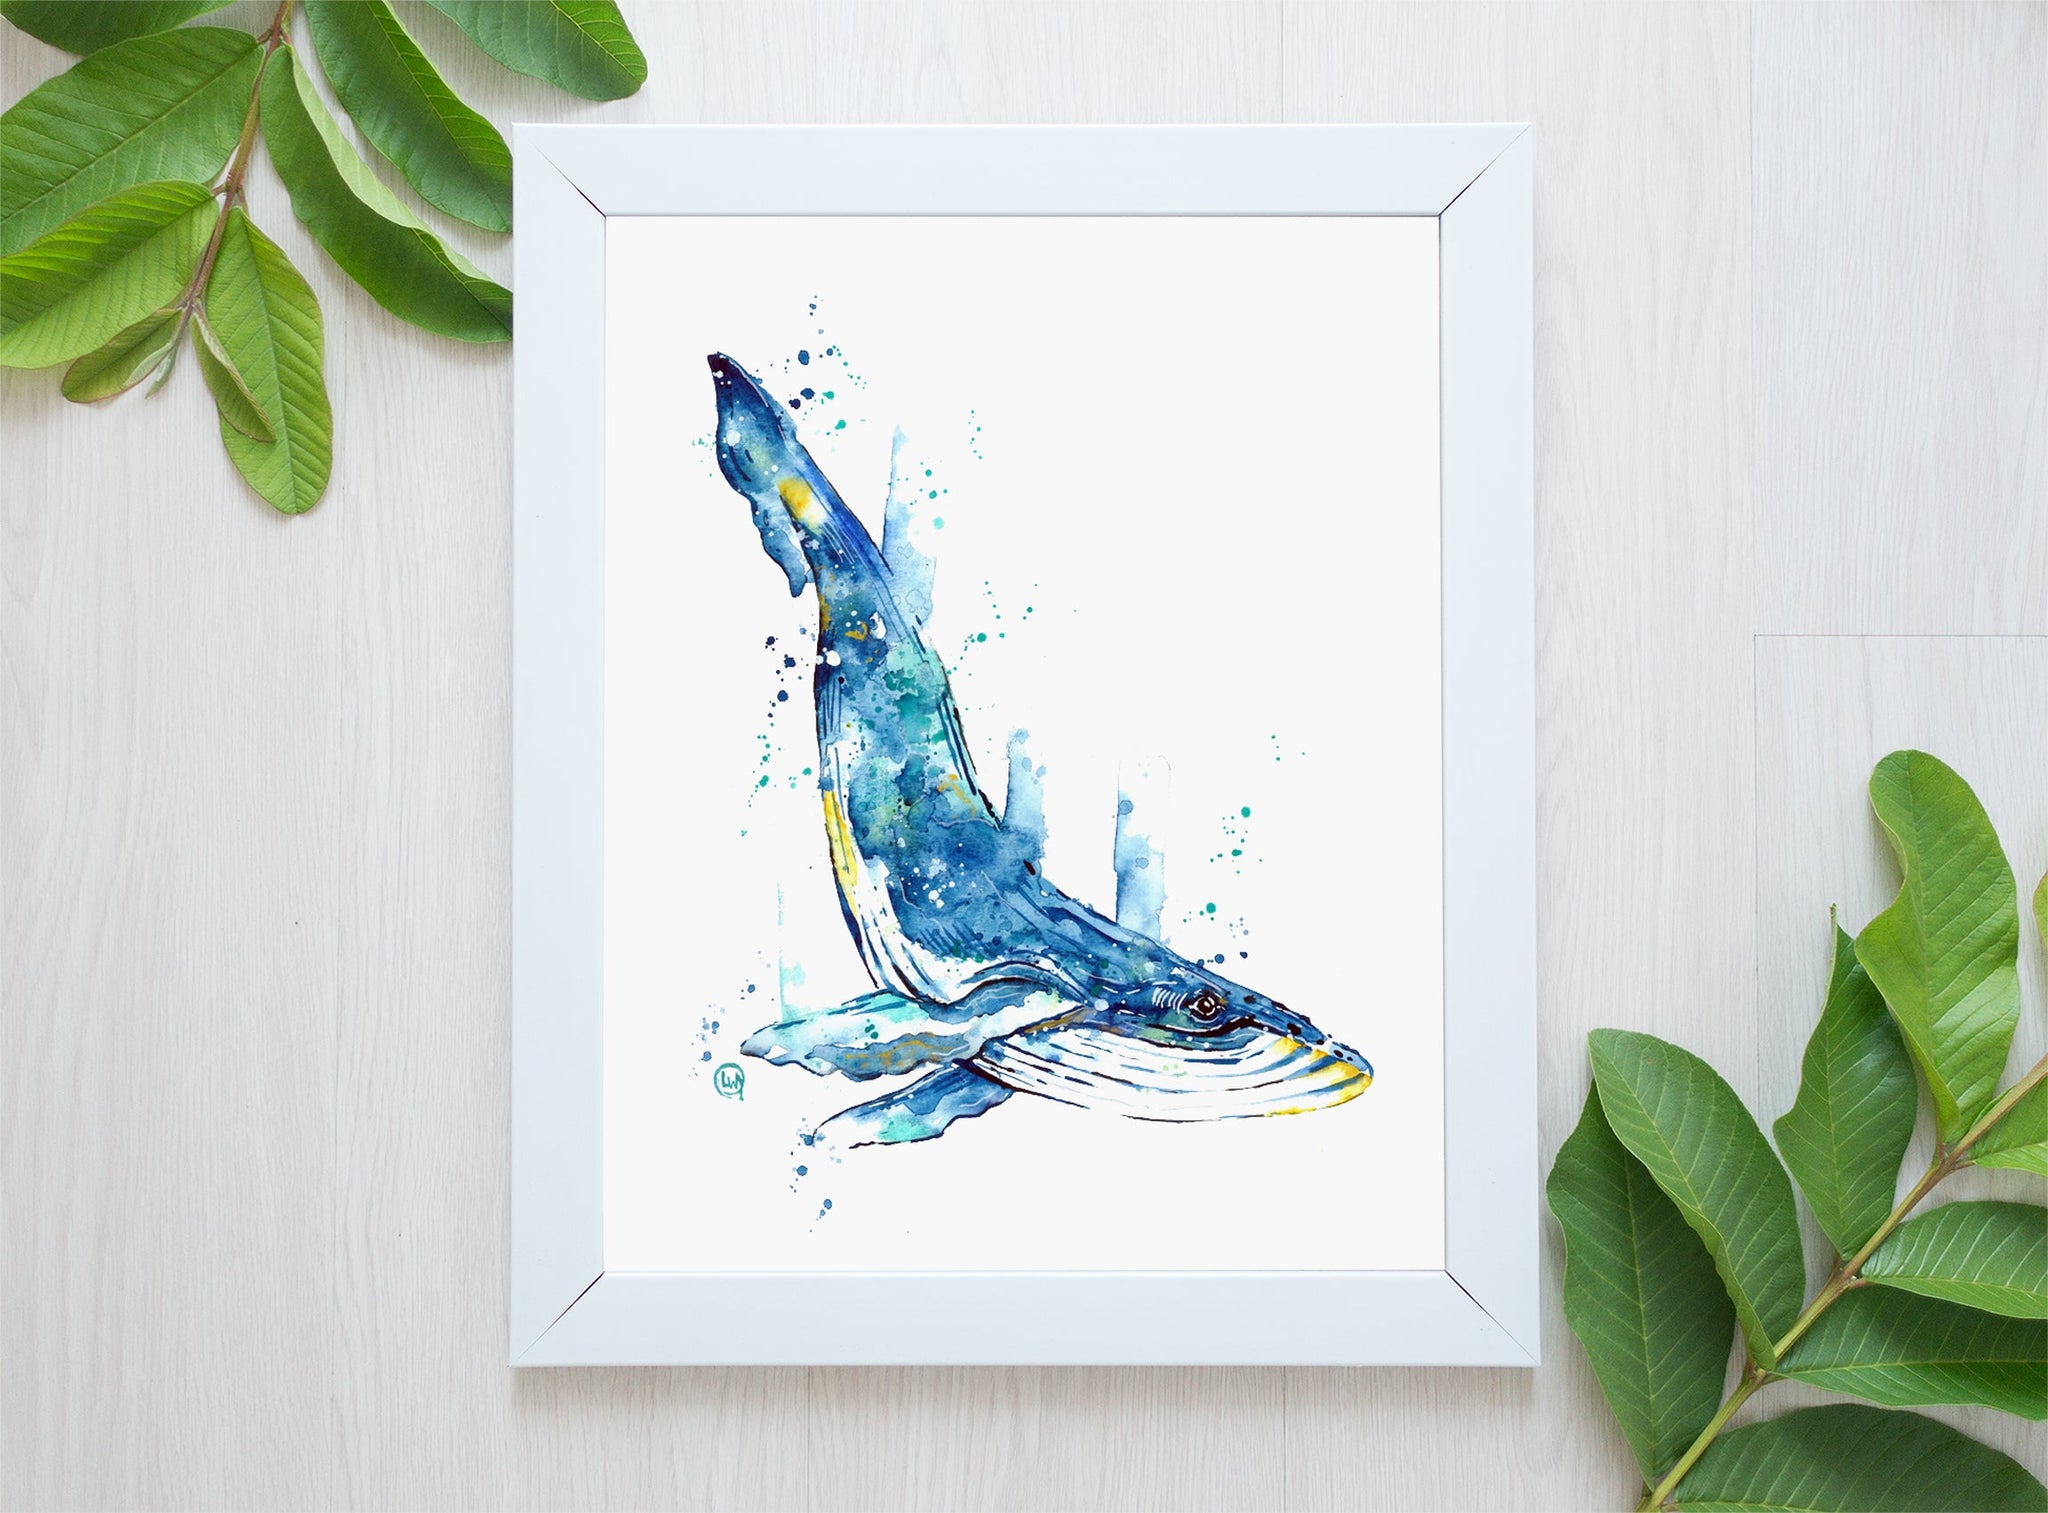 Painting Of Peacock Painting In Watercolor - GranNino